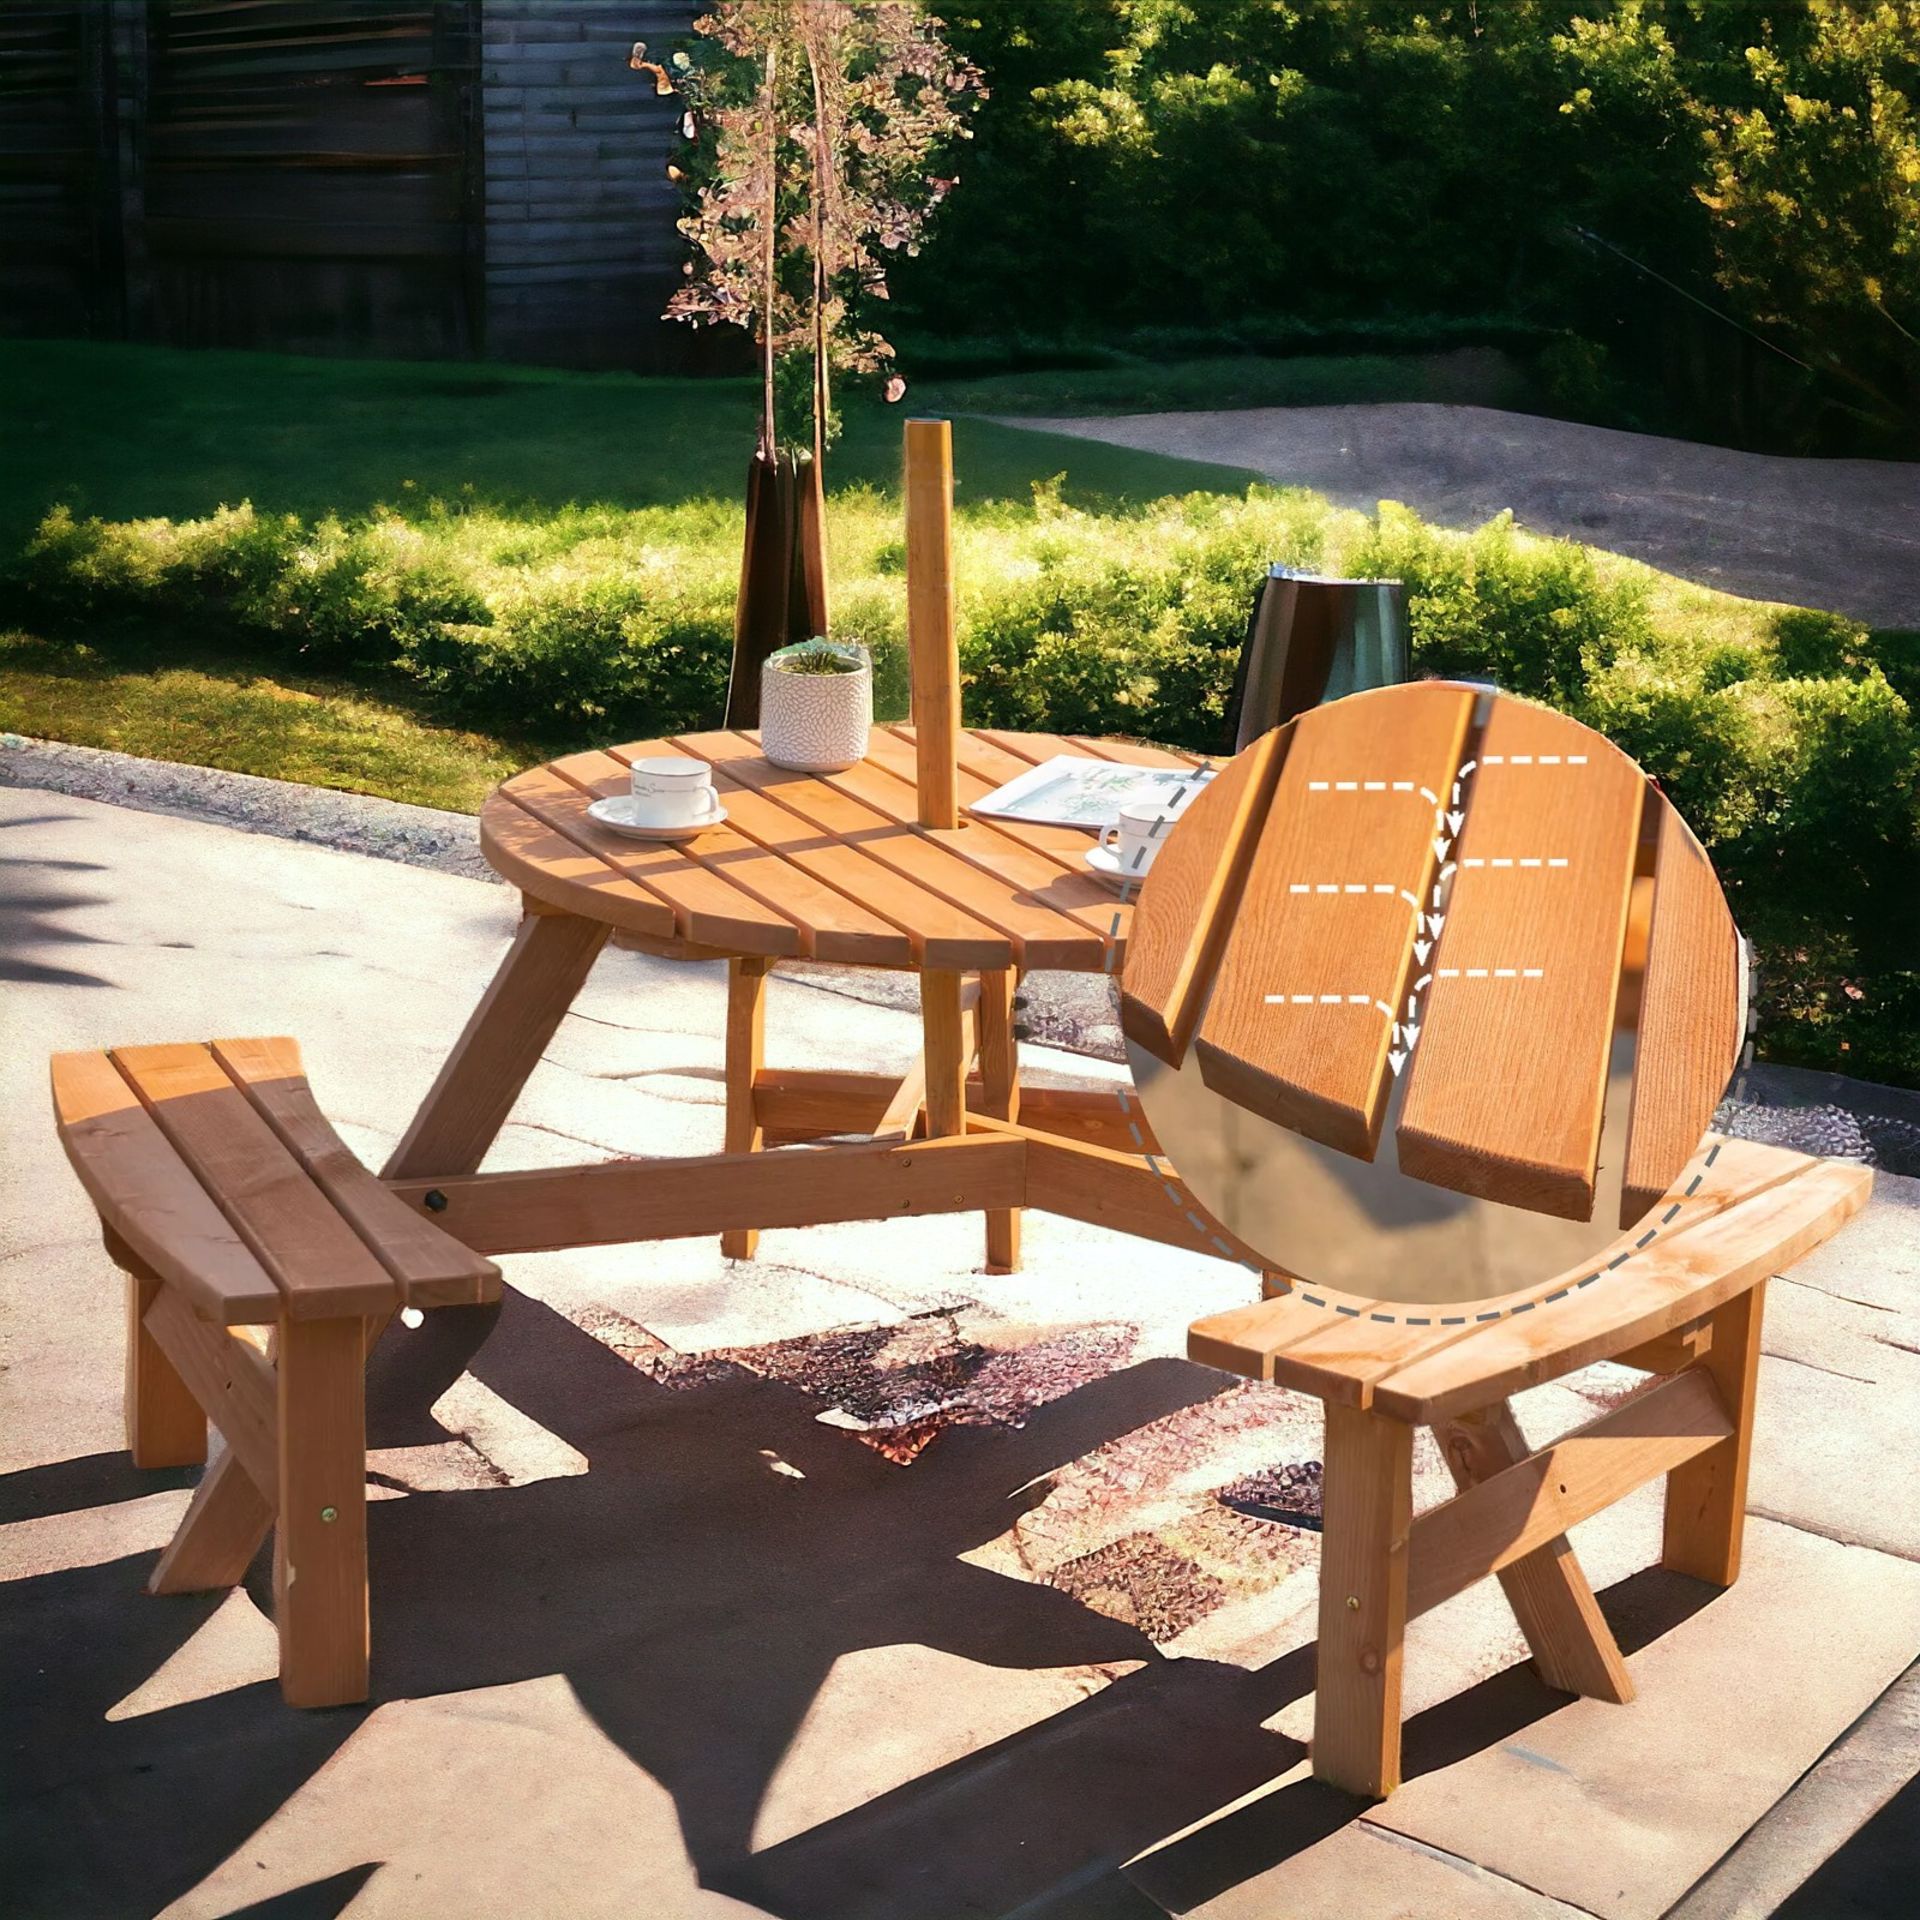 FREE DELIVERY-BRAND NEW 6 PERSON FIR WOOD PARASOL TABLE BENCH SET OUTDOOR GARDEN PATIO DINING - Image 2 of 2